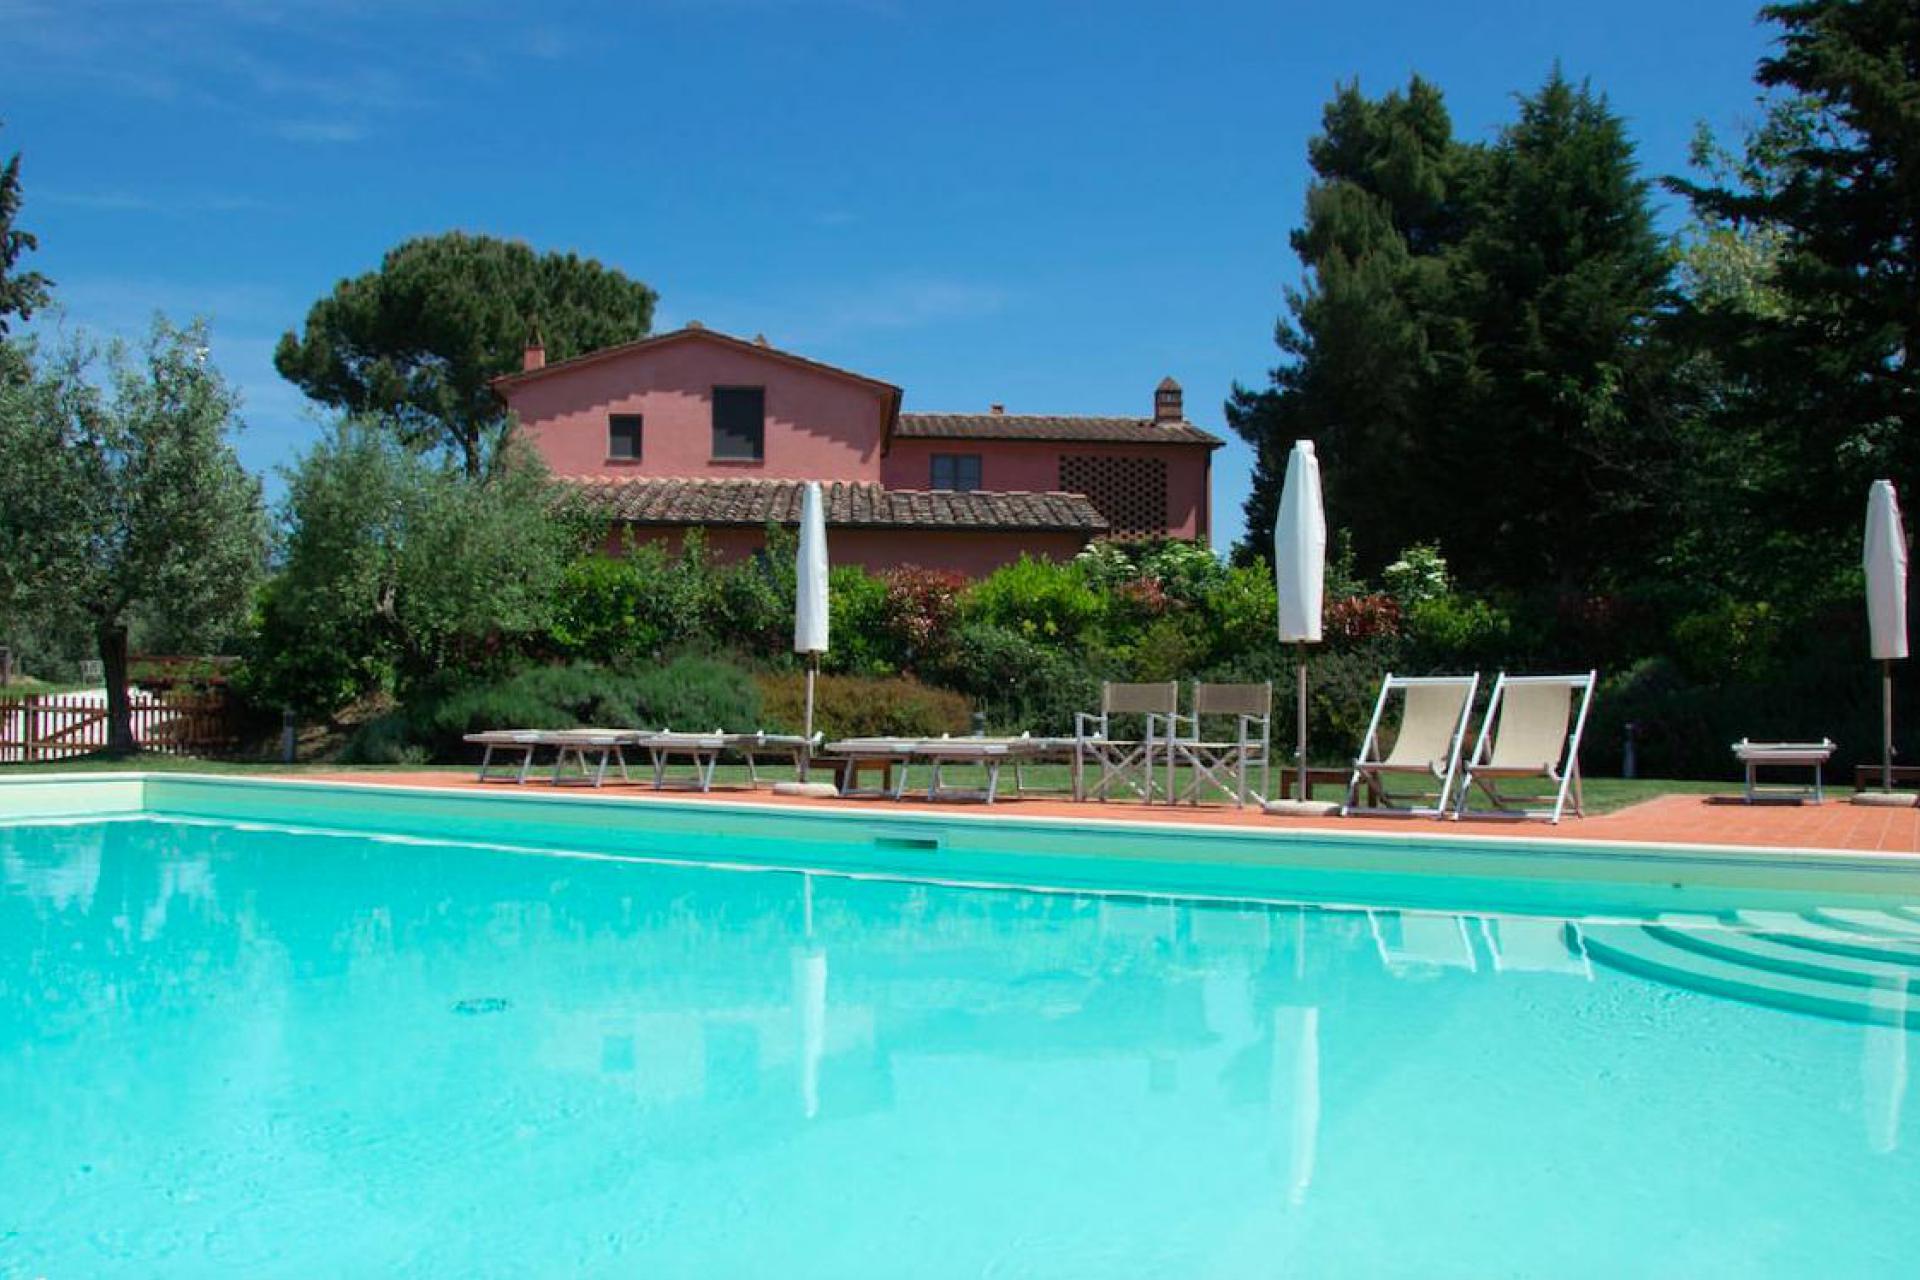 Child-friendly agriturismo near Pisa and Lucca